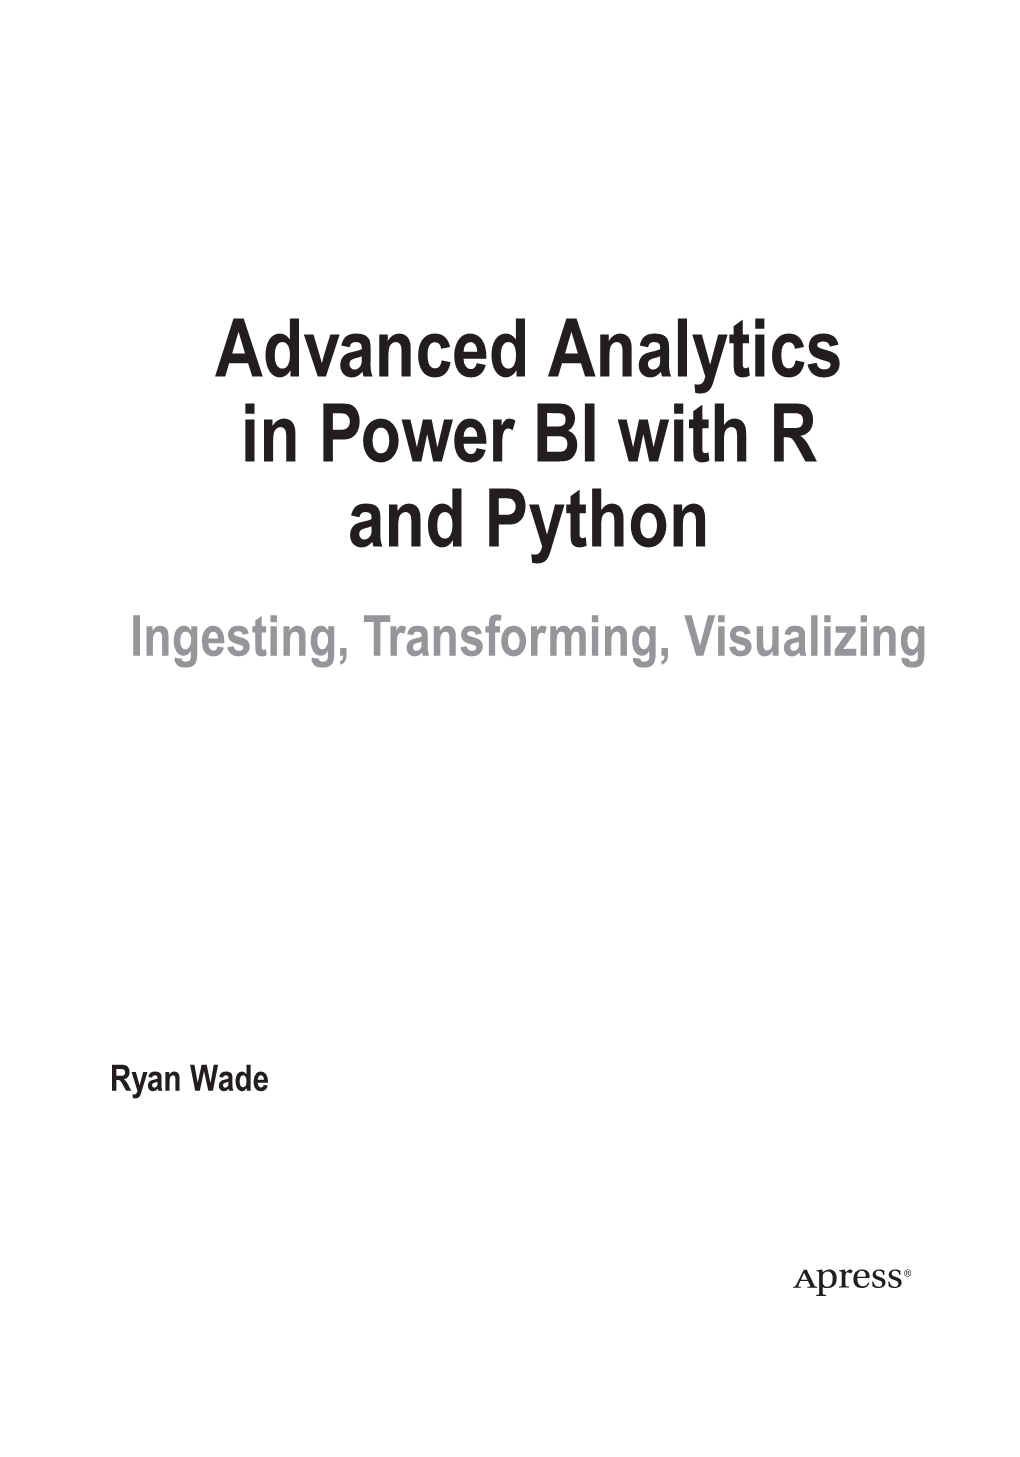 Advanced Analytics in Power BI with R and Python Ingesting, Transforming, Visualizing